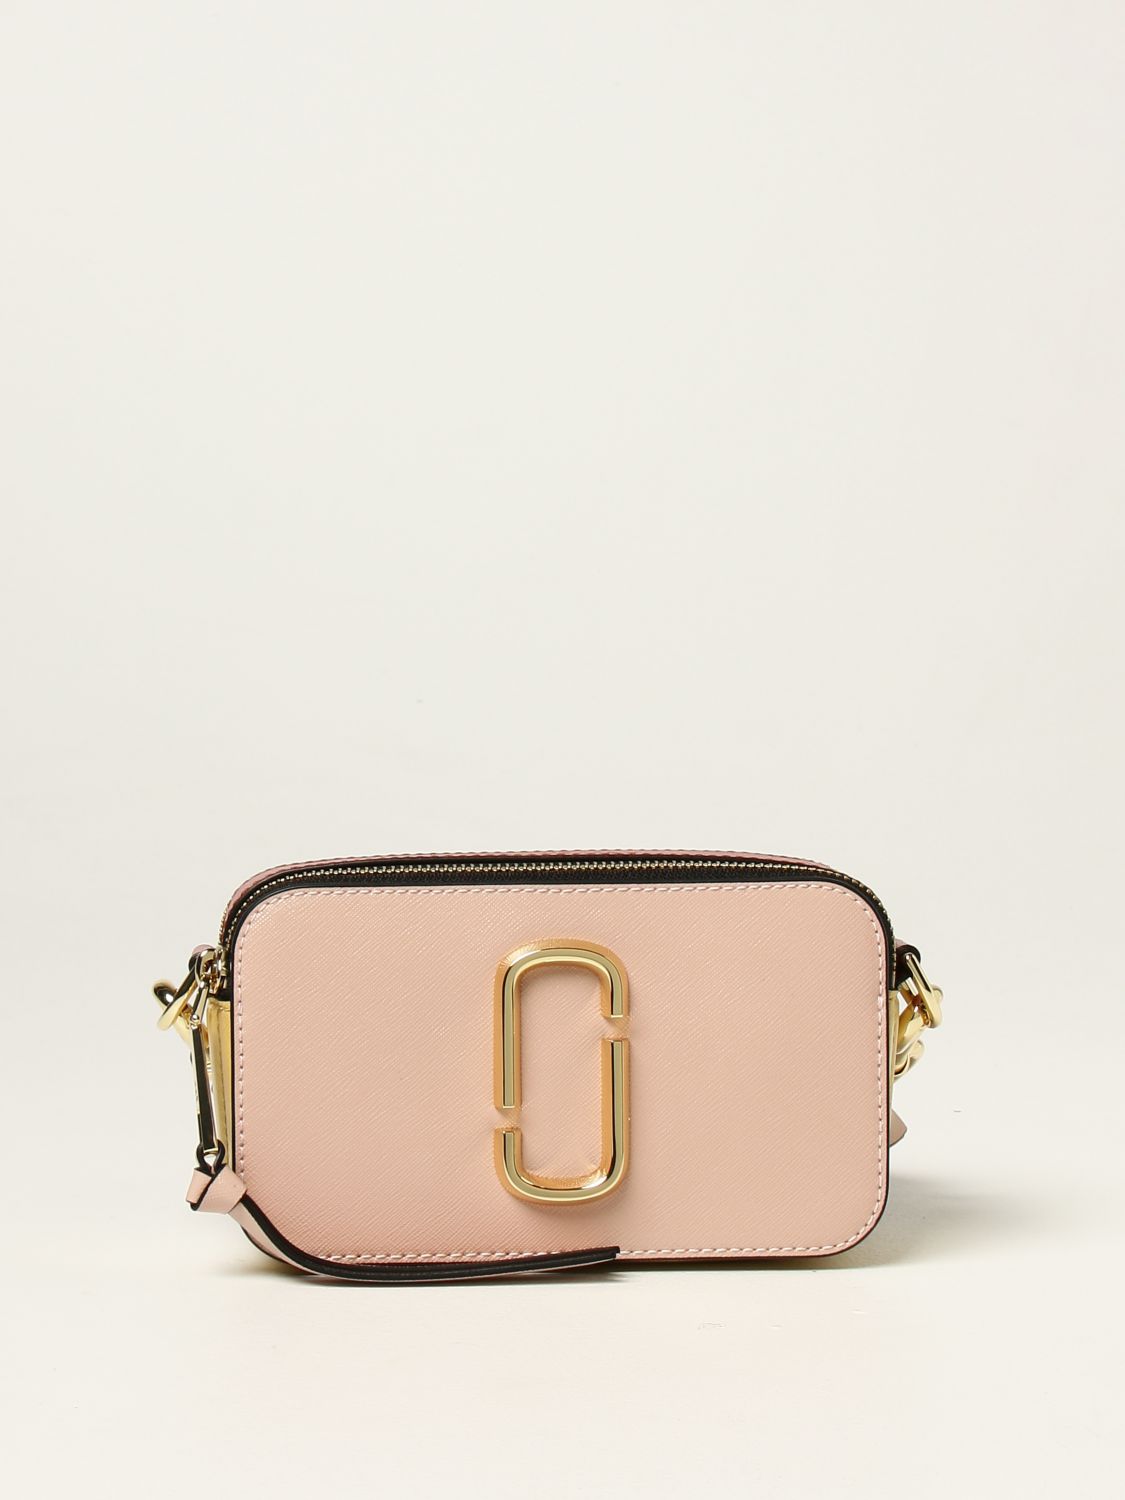 The Snapshot Marc Jacobs bag in tricolor saffiano leather